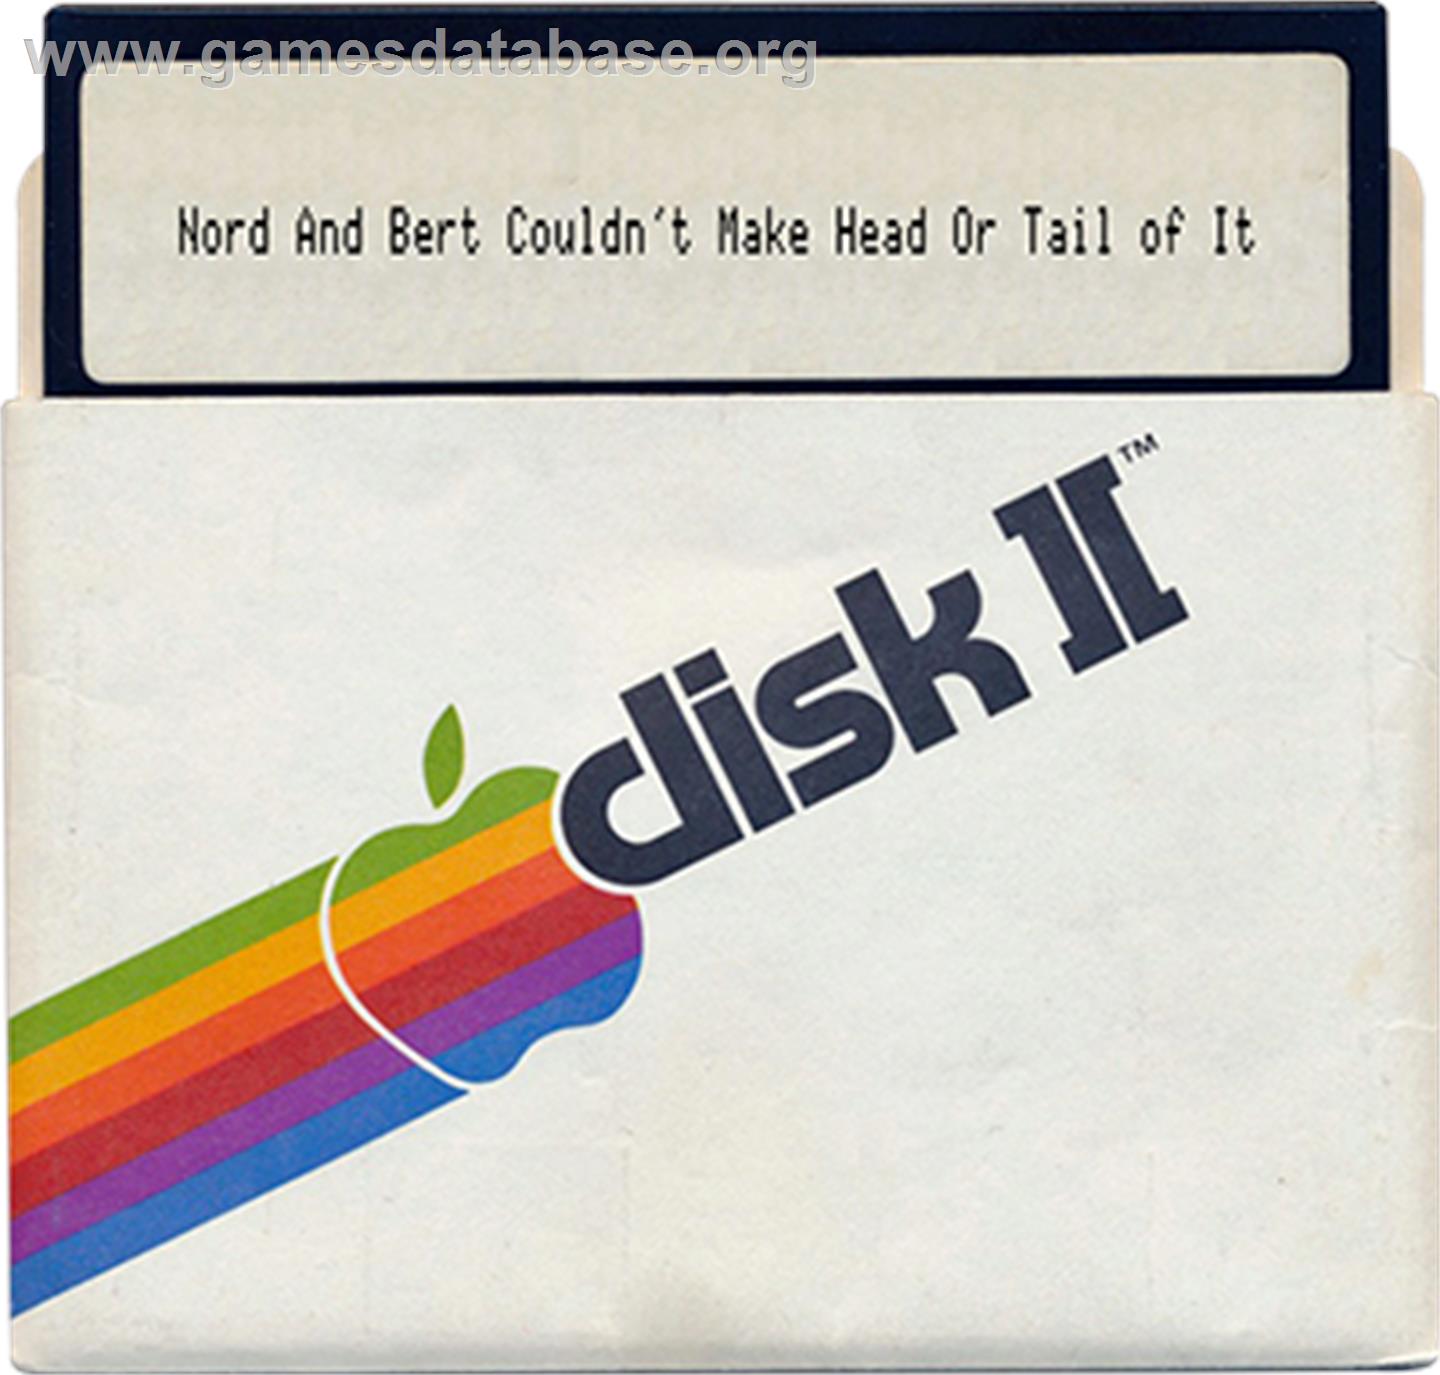 Nord and Bert Couldn't Make Head or Tail of It - Apple II - Artwork - Disc